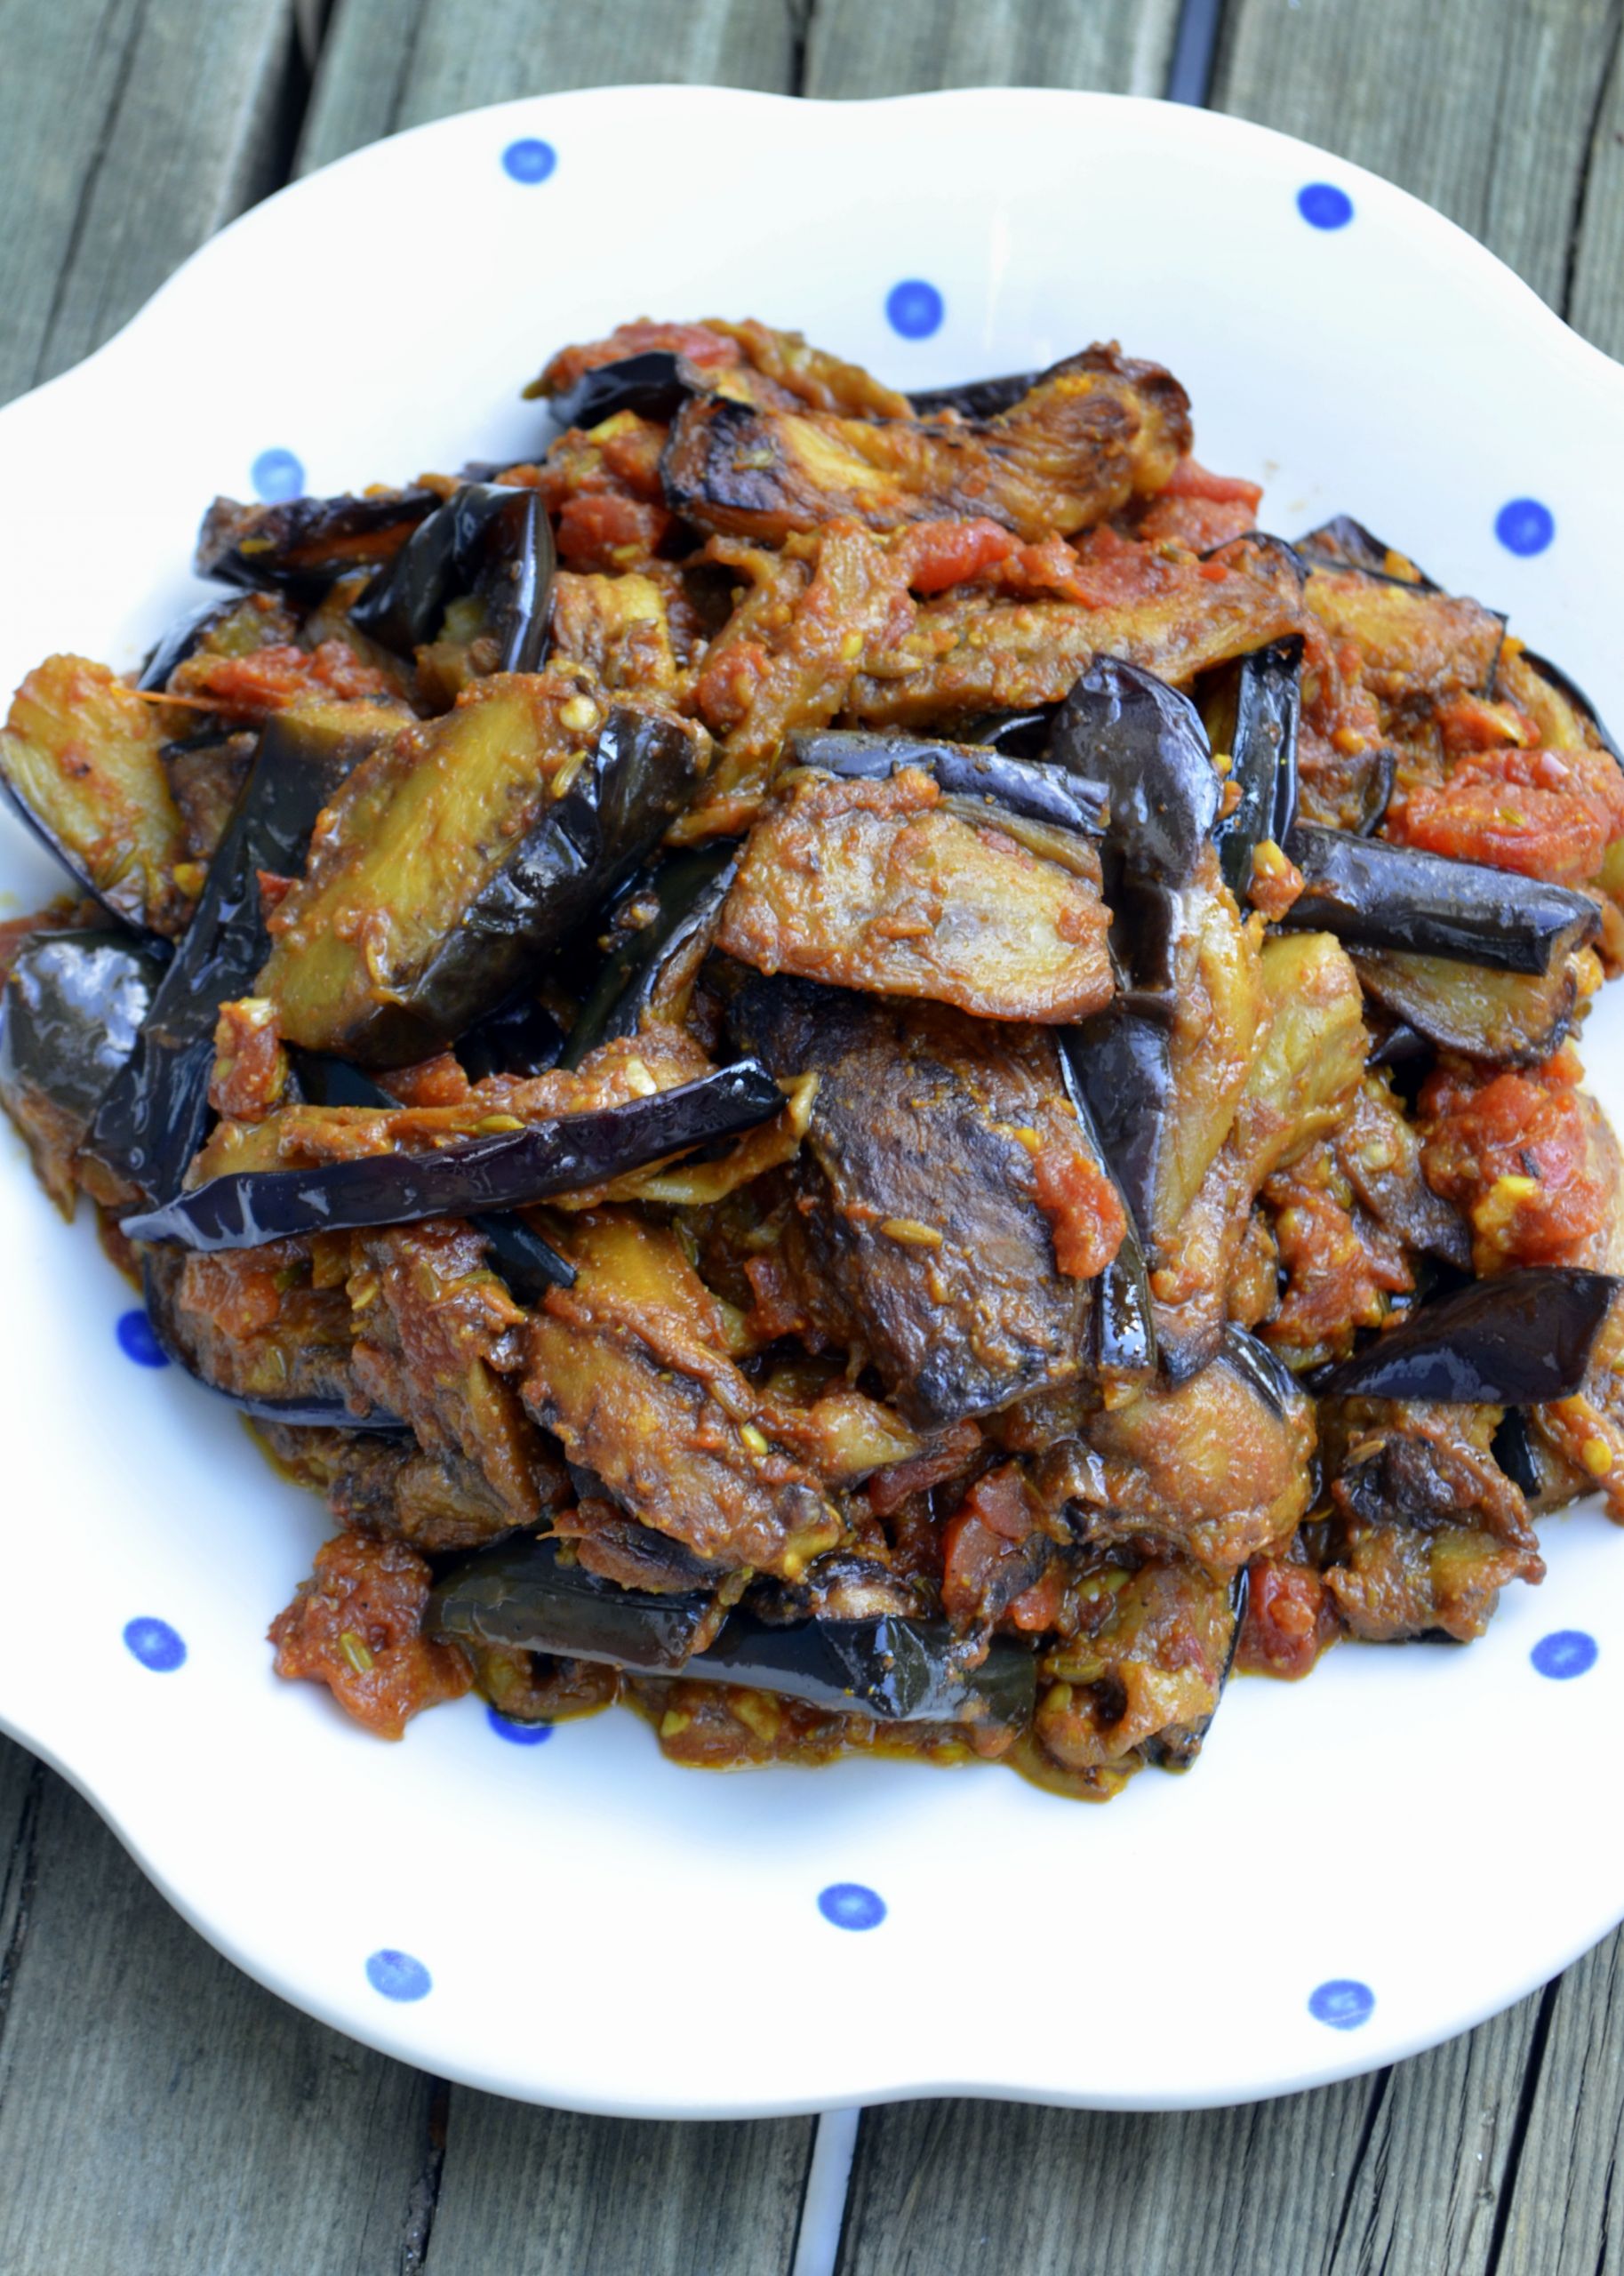 Indian Baby Eggplant Recipes
 25 Ideas for Baby Eggplant Recipes Indian Home Family